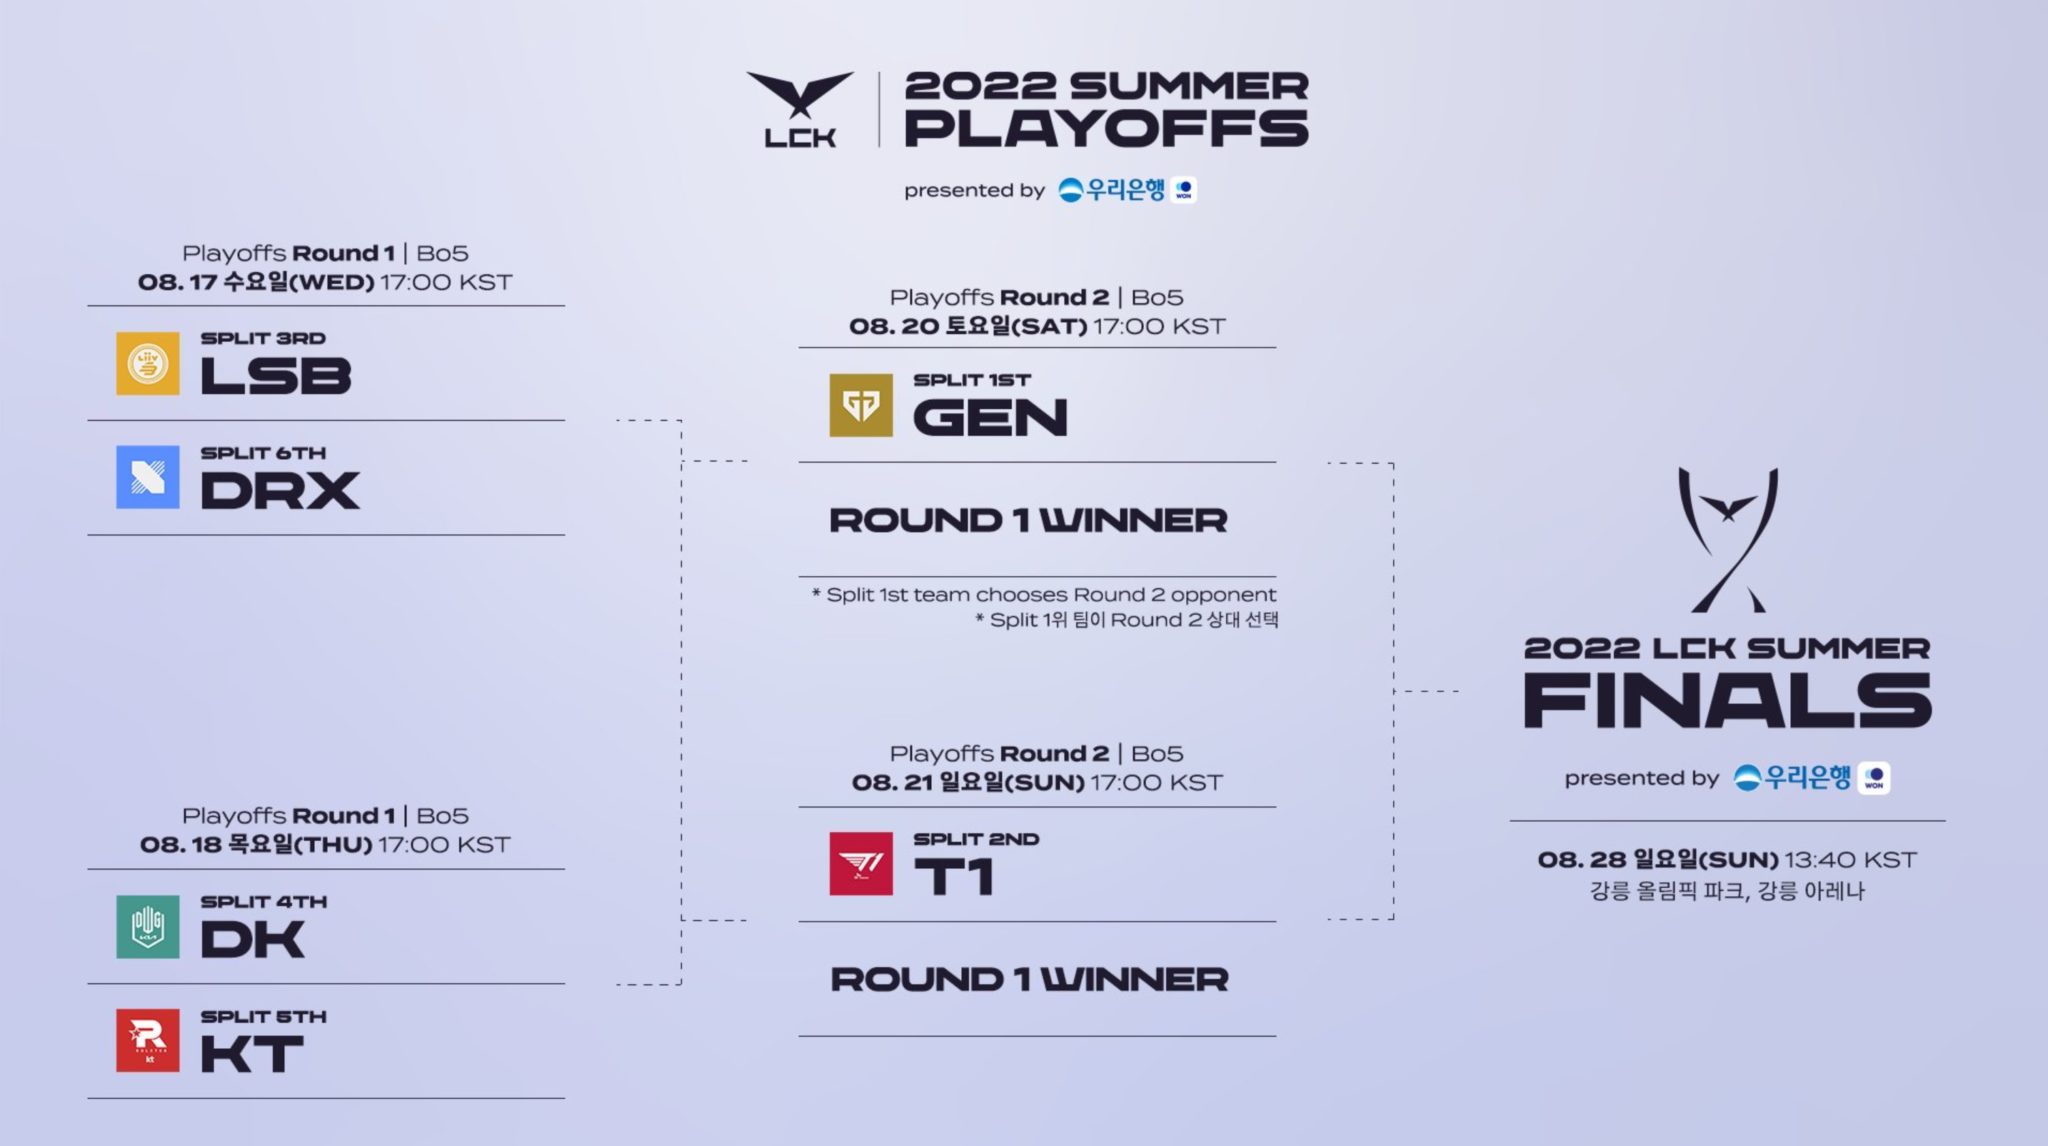 Here are the matchups and bracket for the 2022 LCK Summer playoffs